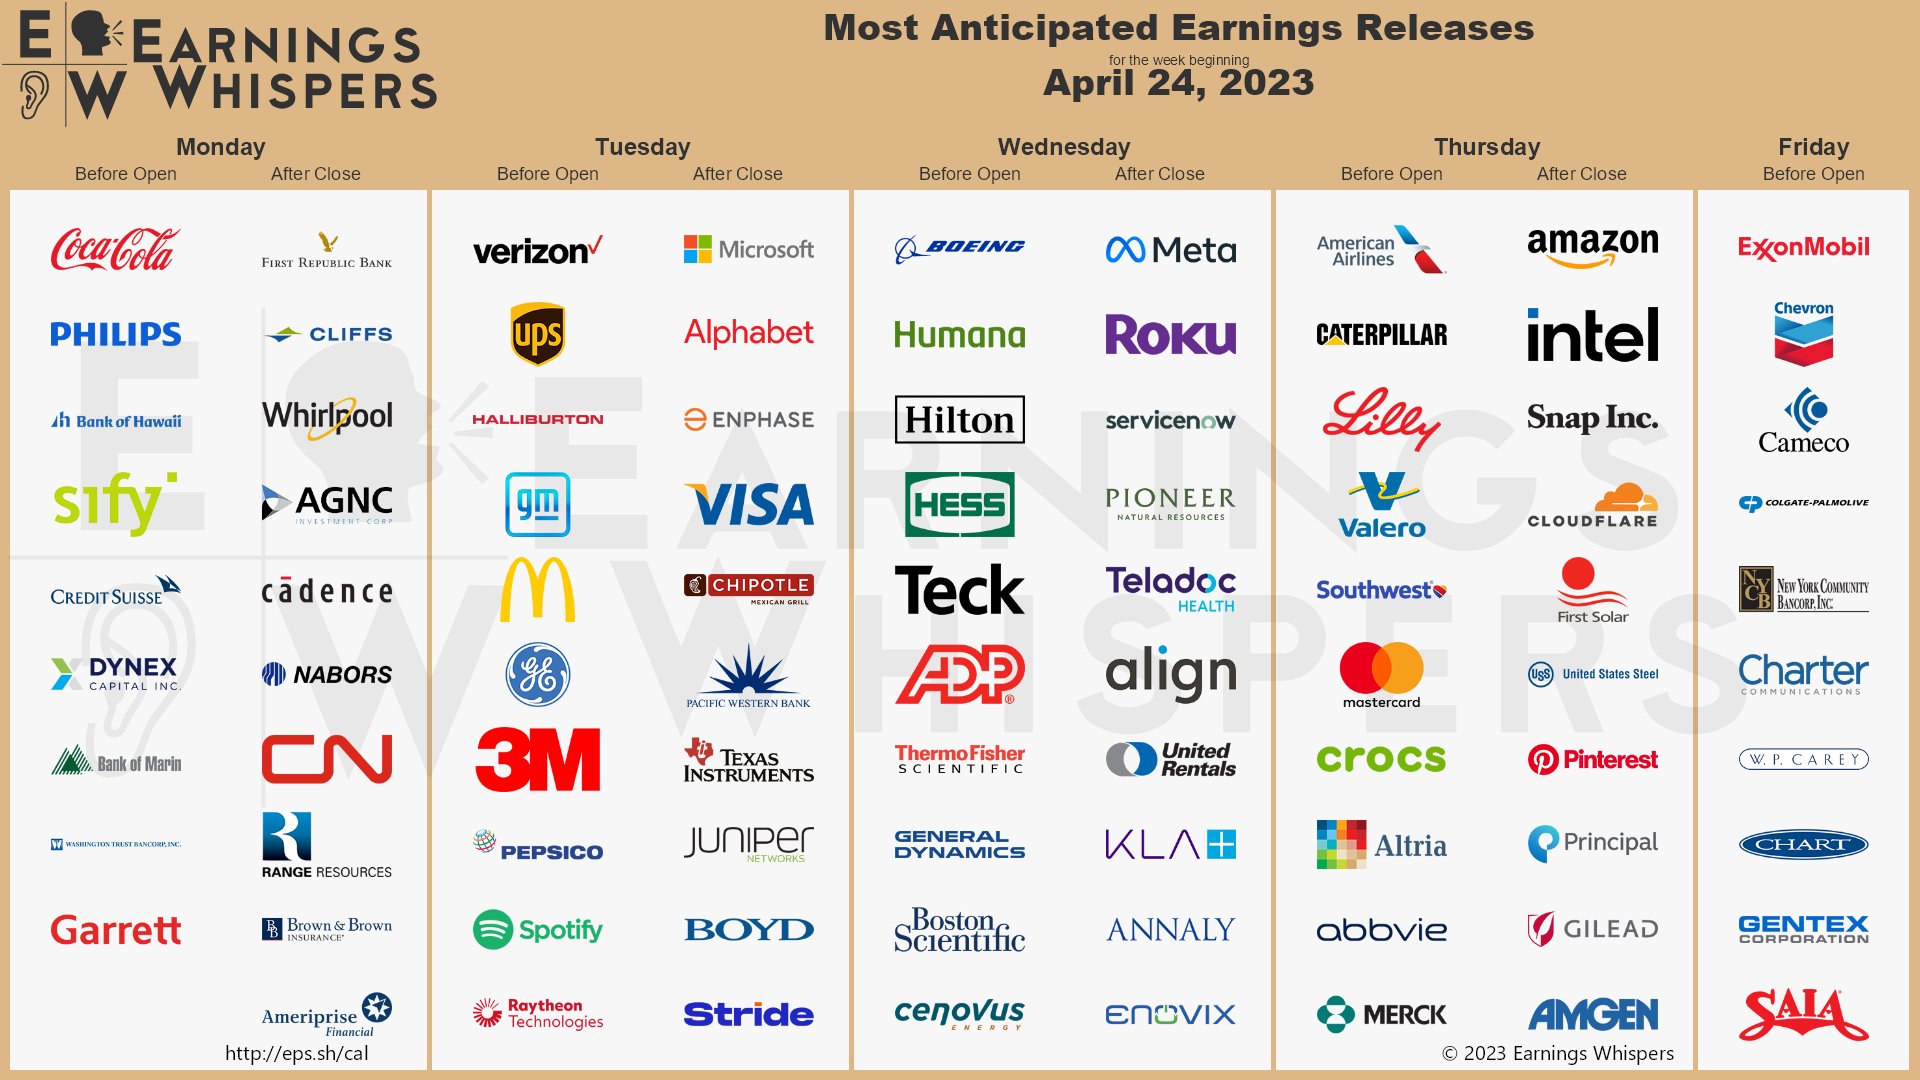 The most anticipated earnings releases scheduled for week are Amazon #AMZN, Microsoft #MSFT, Meta Platforms #META, First Republic Bank #FRC, Coca-Cola #KO, Boeing #BA, Verizon #VZ, Alphabet #GOOGL, UPS #UPS, and Enphase Energy #ENPH. 

